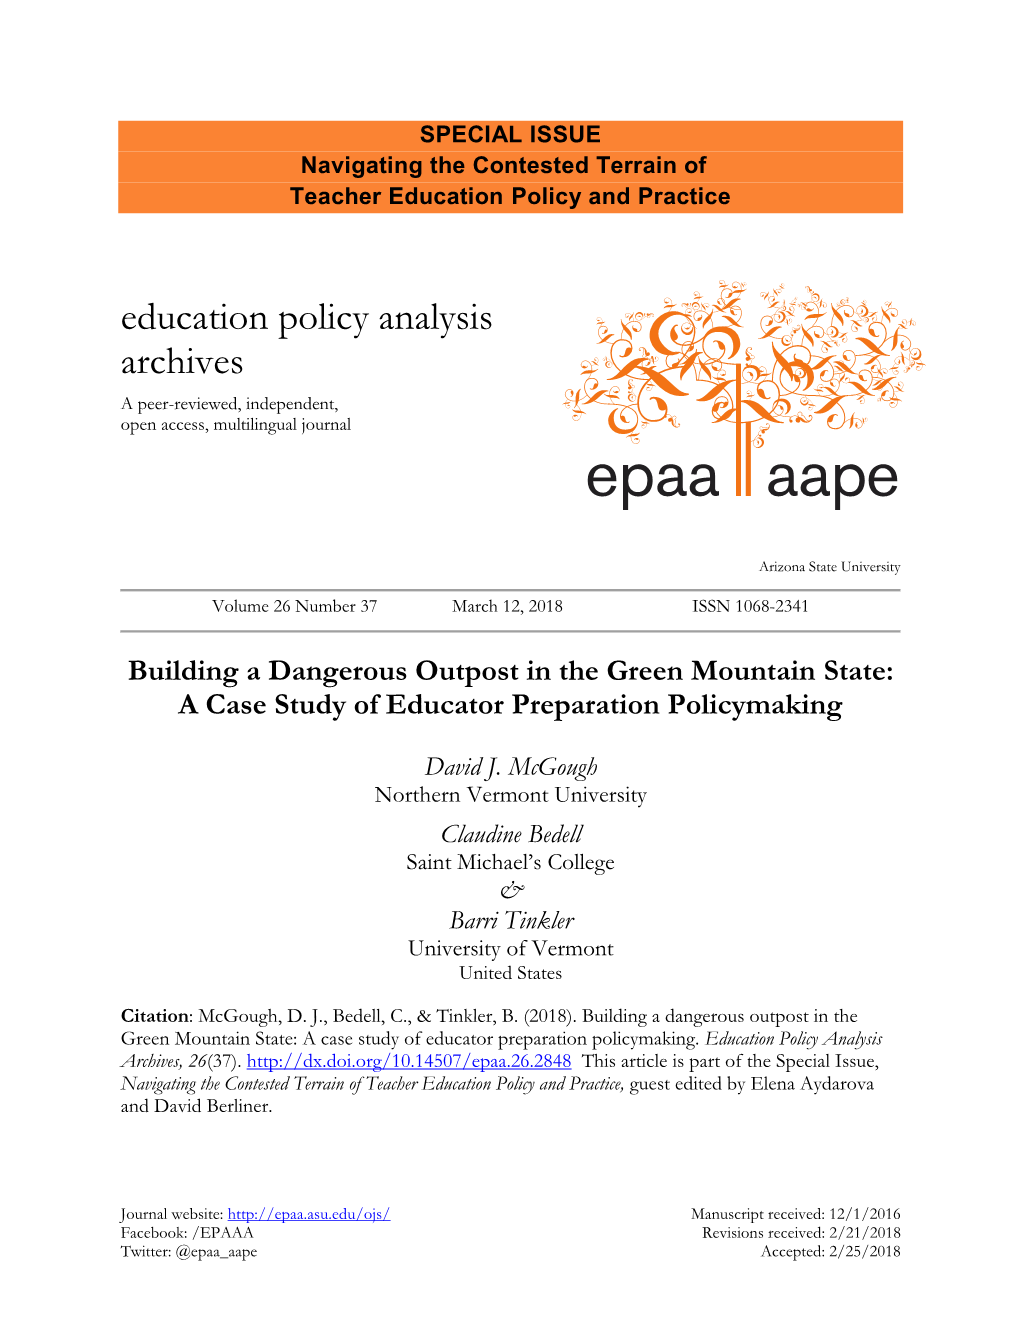 Building a Dangerous Outpost in the Green Mountain State: a Case Study of Educator Preparation Policymaking